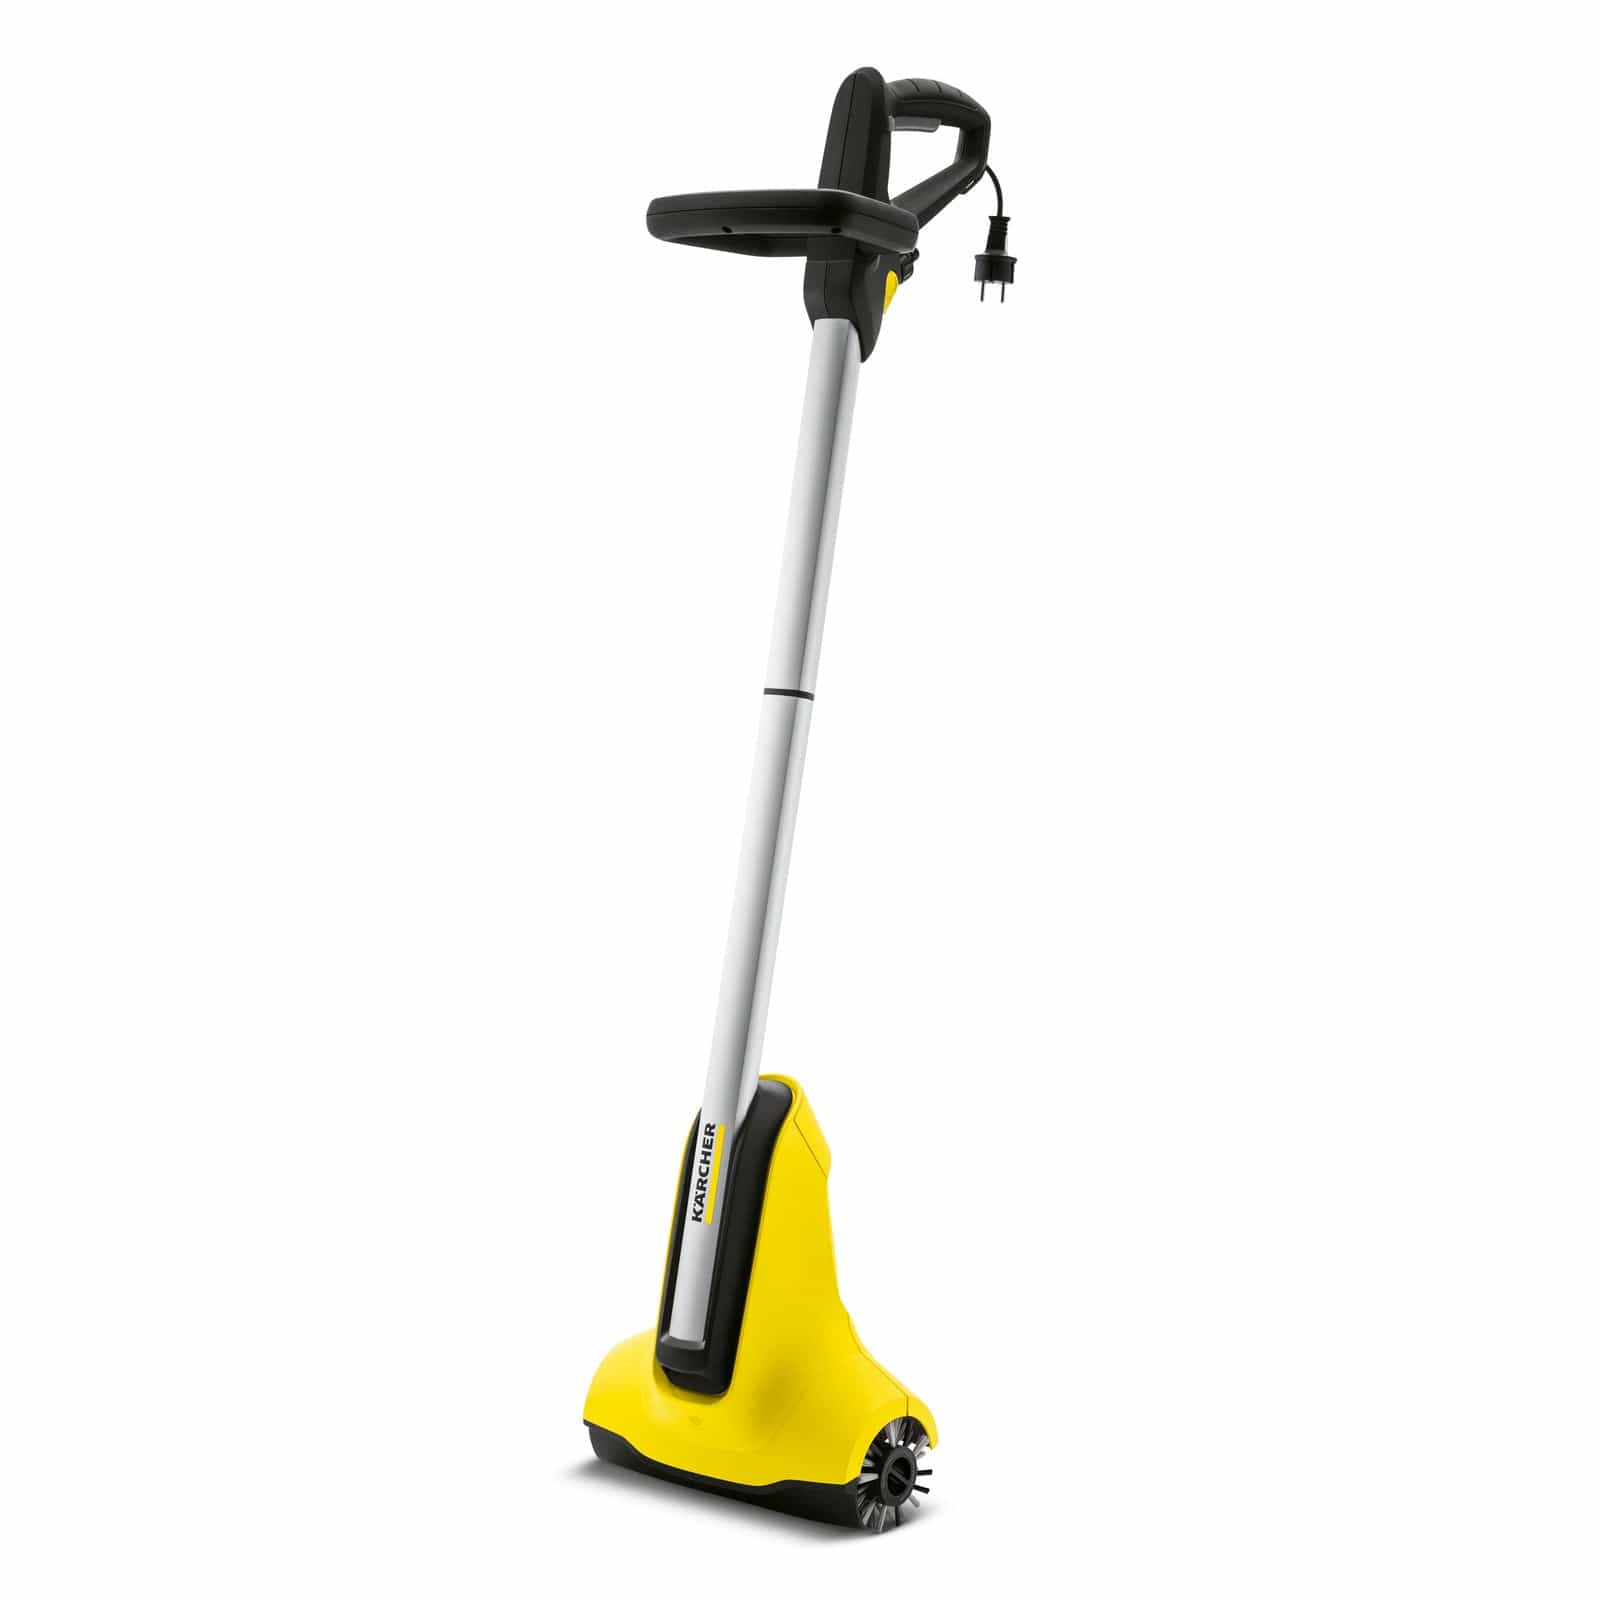 Karcher Surface Cleaner Pcl 4 Patio Cleaner | Supply Master | Accra, Ghana Pressure Washer Buy Tools hardware Building materials